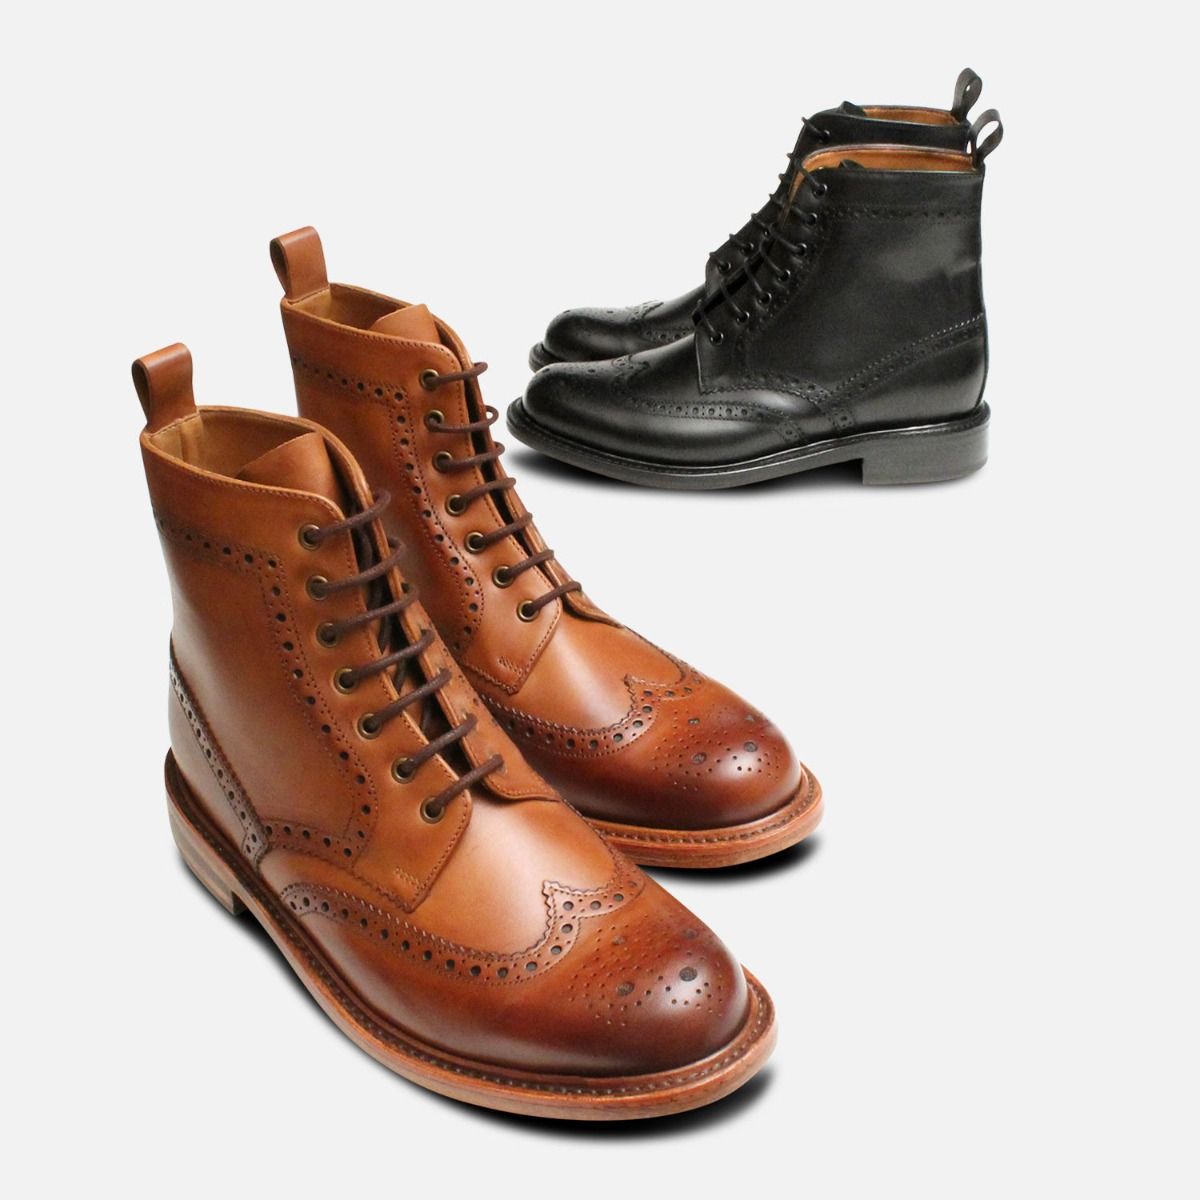 Prestige Country Brogue Mens Leather Boots Lace Up Rubber Sole Goodyear Welted 